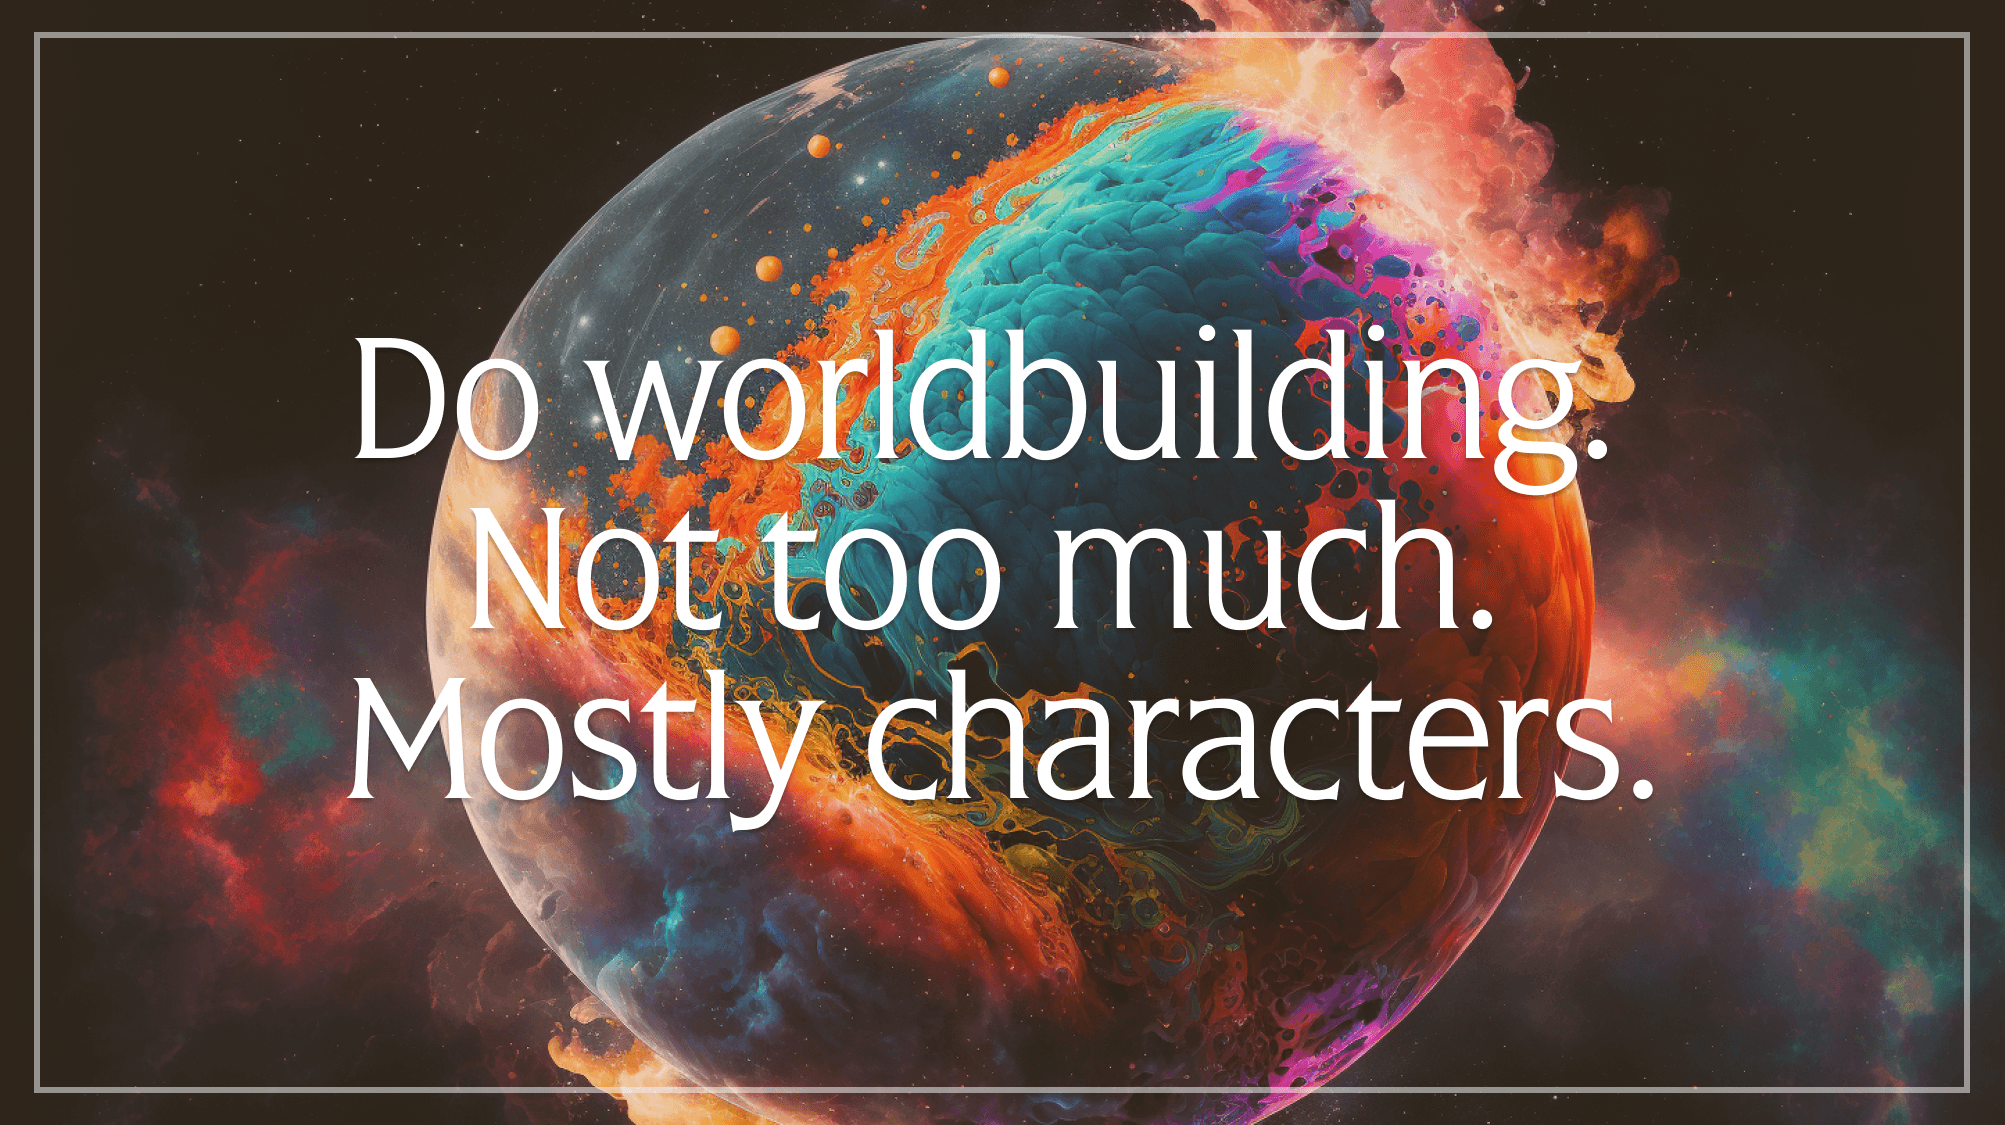 Feature image for Do worldbuilding. Not too much. Mostly characters. Five worldbuilding pitfalls to avoid.